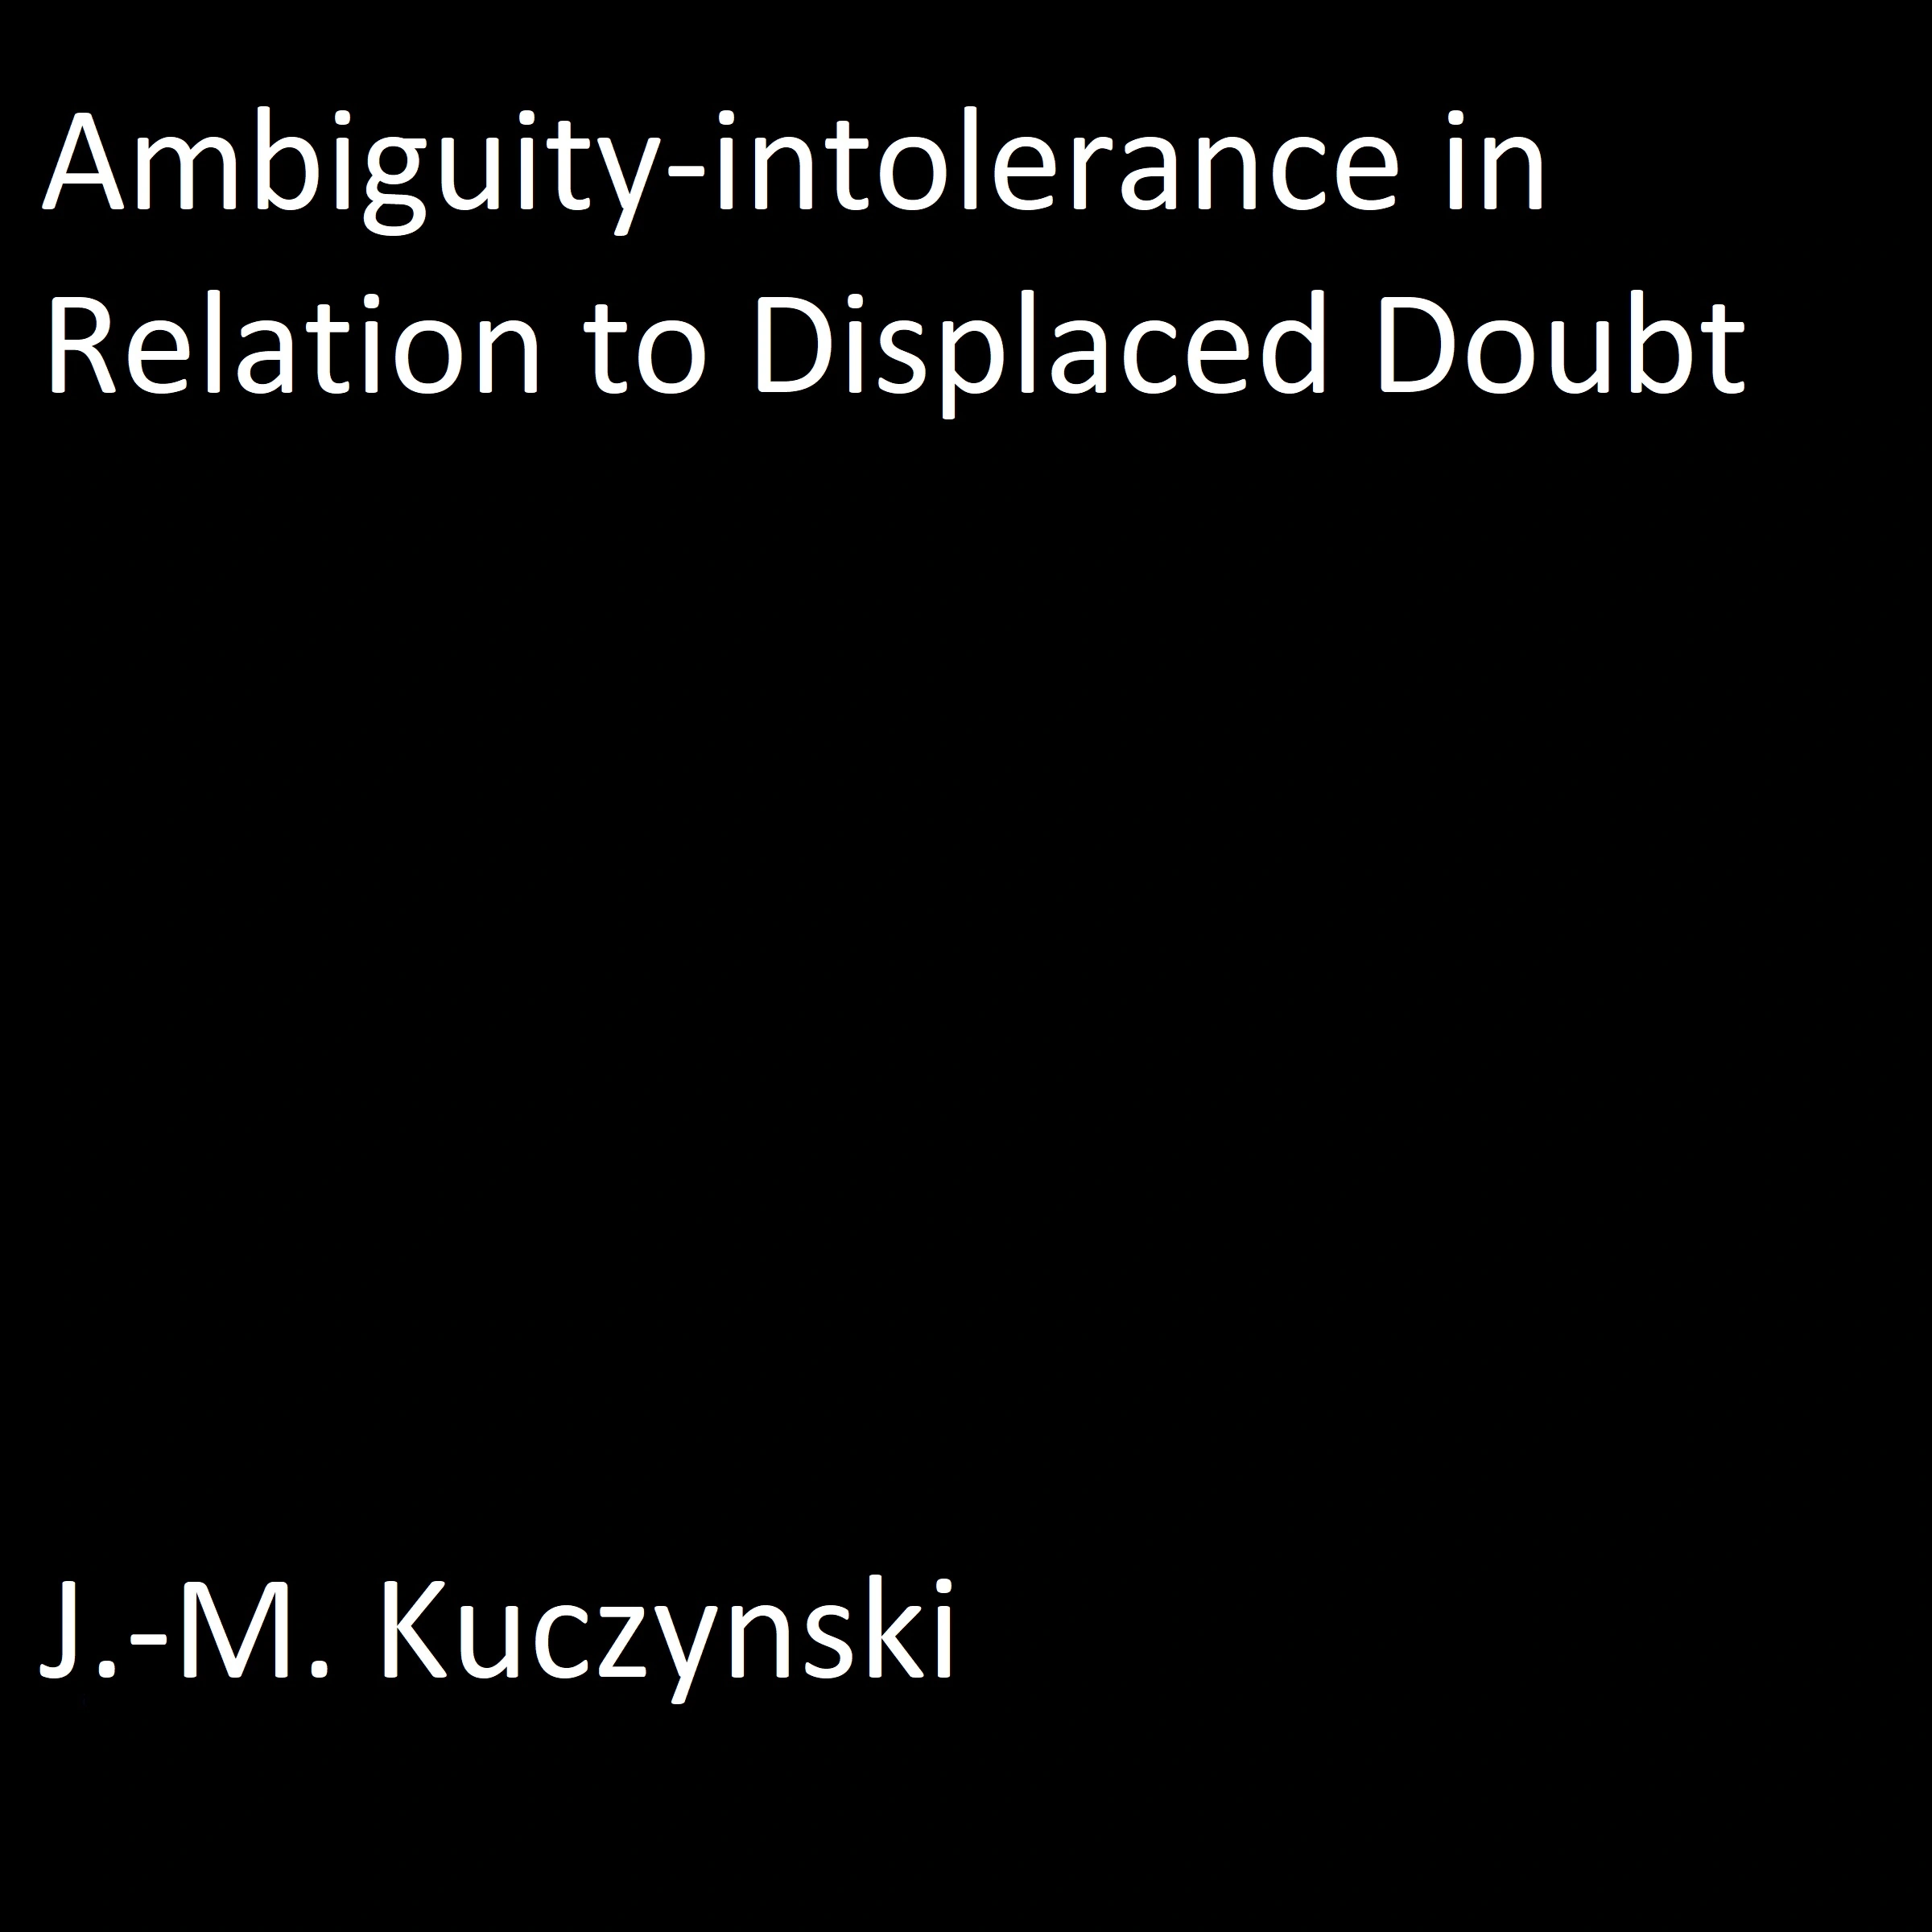 Ambiguity-intolerance in Relation to Displaced Doubt Audiobook by J.-M. Kuczynski